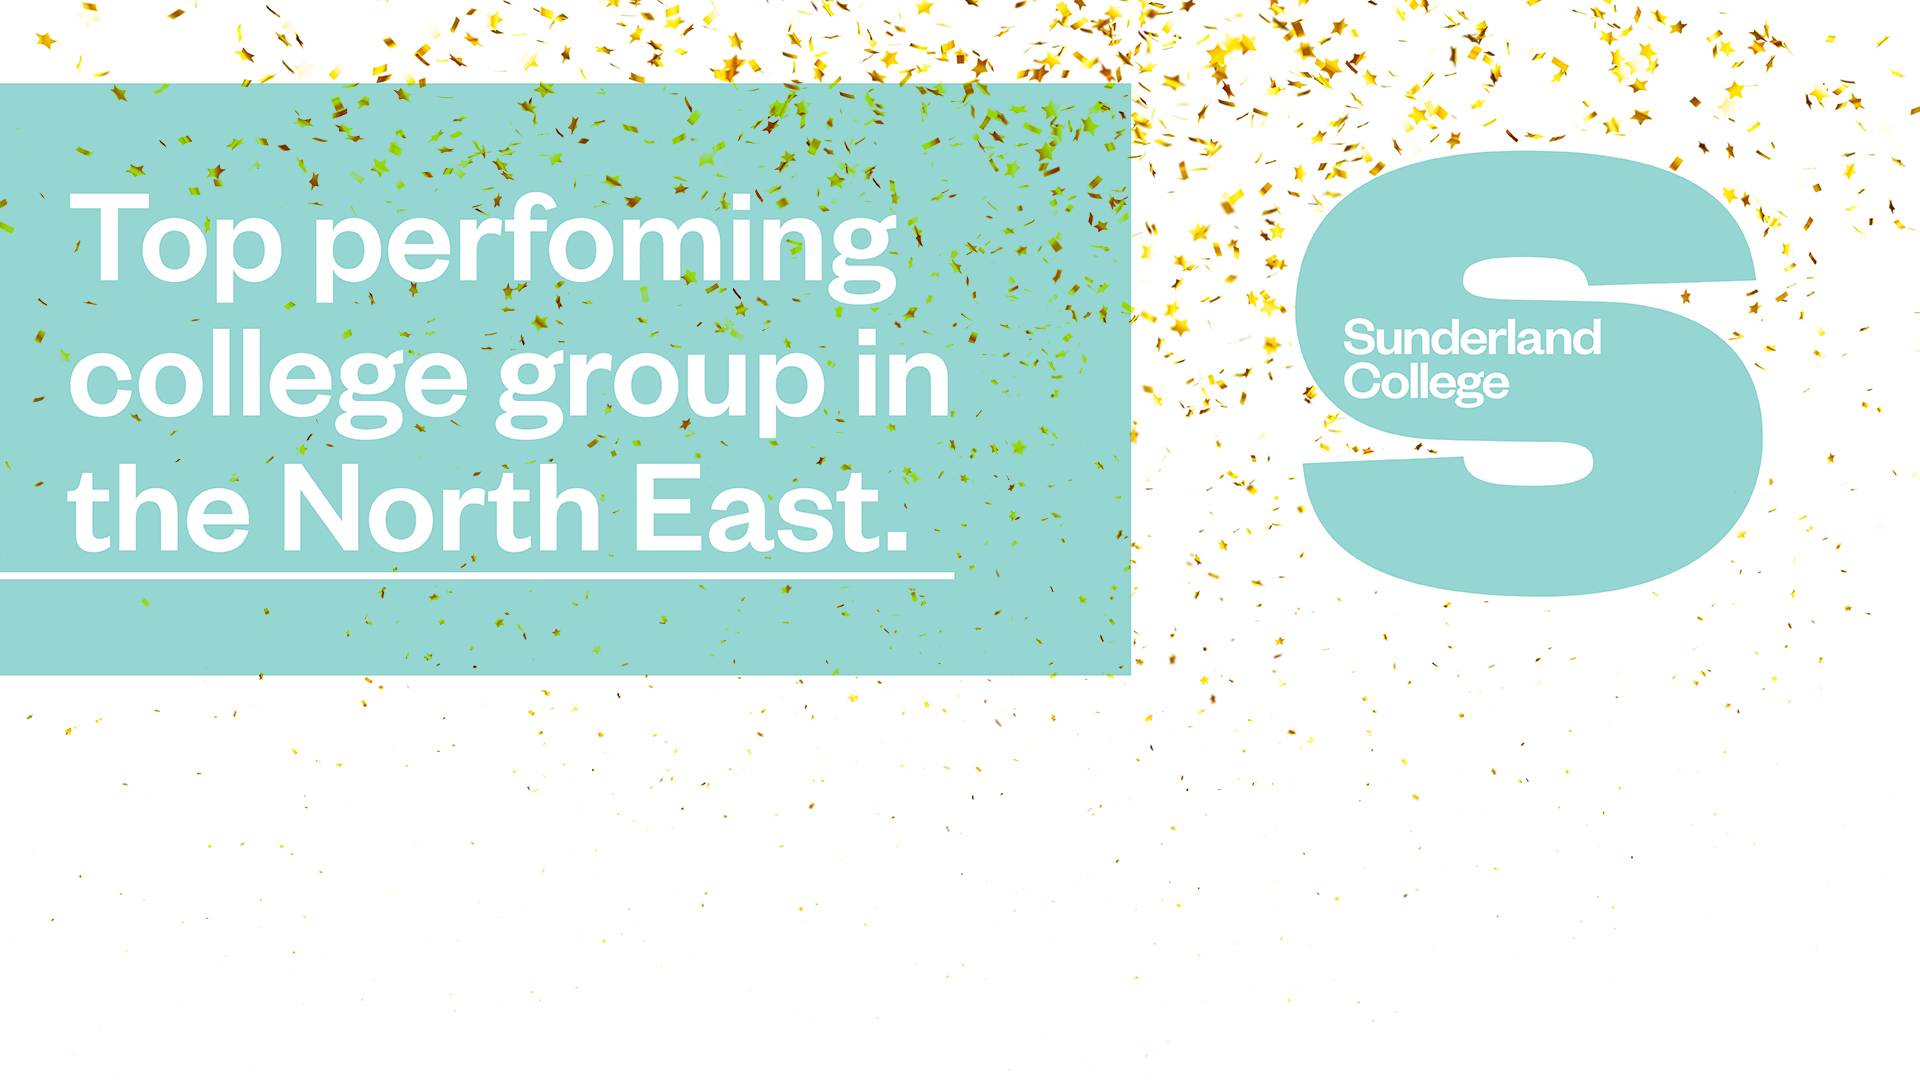 Top performing college group in the North East